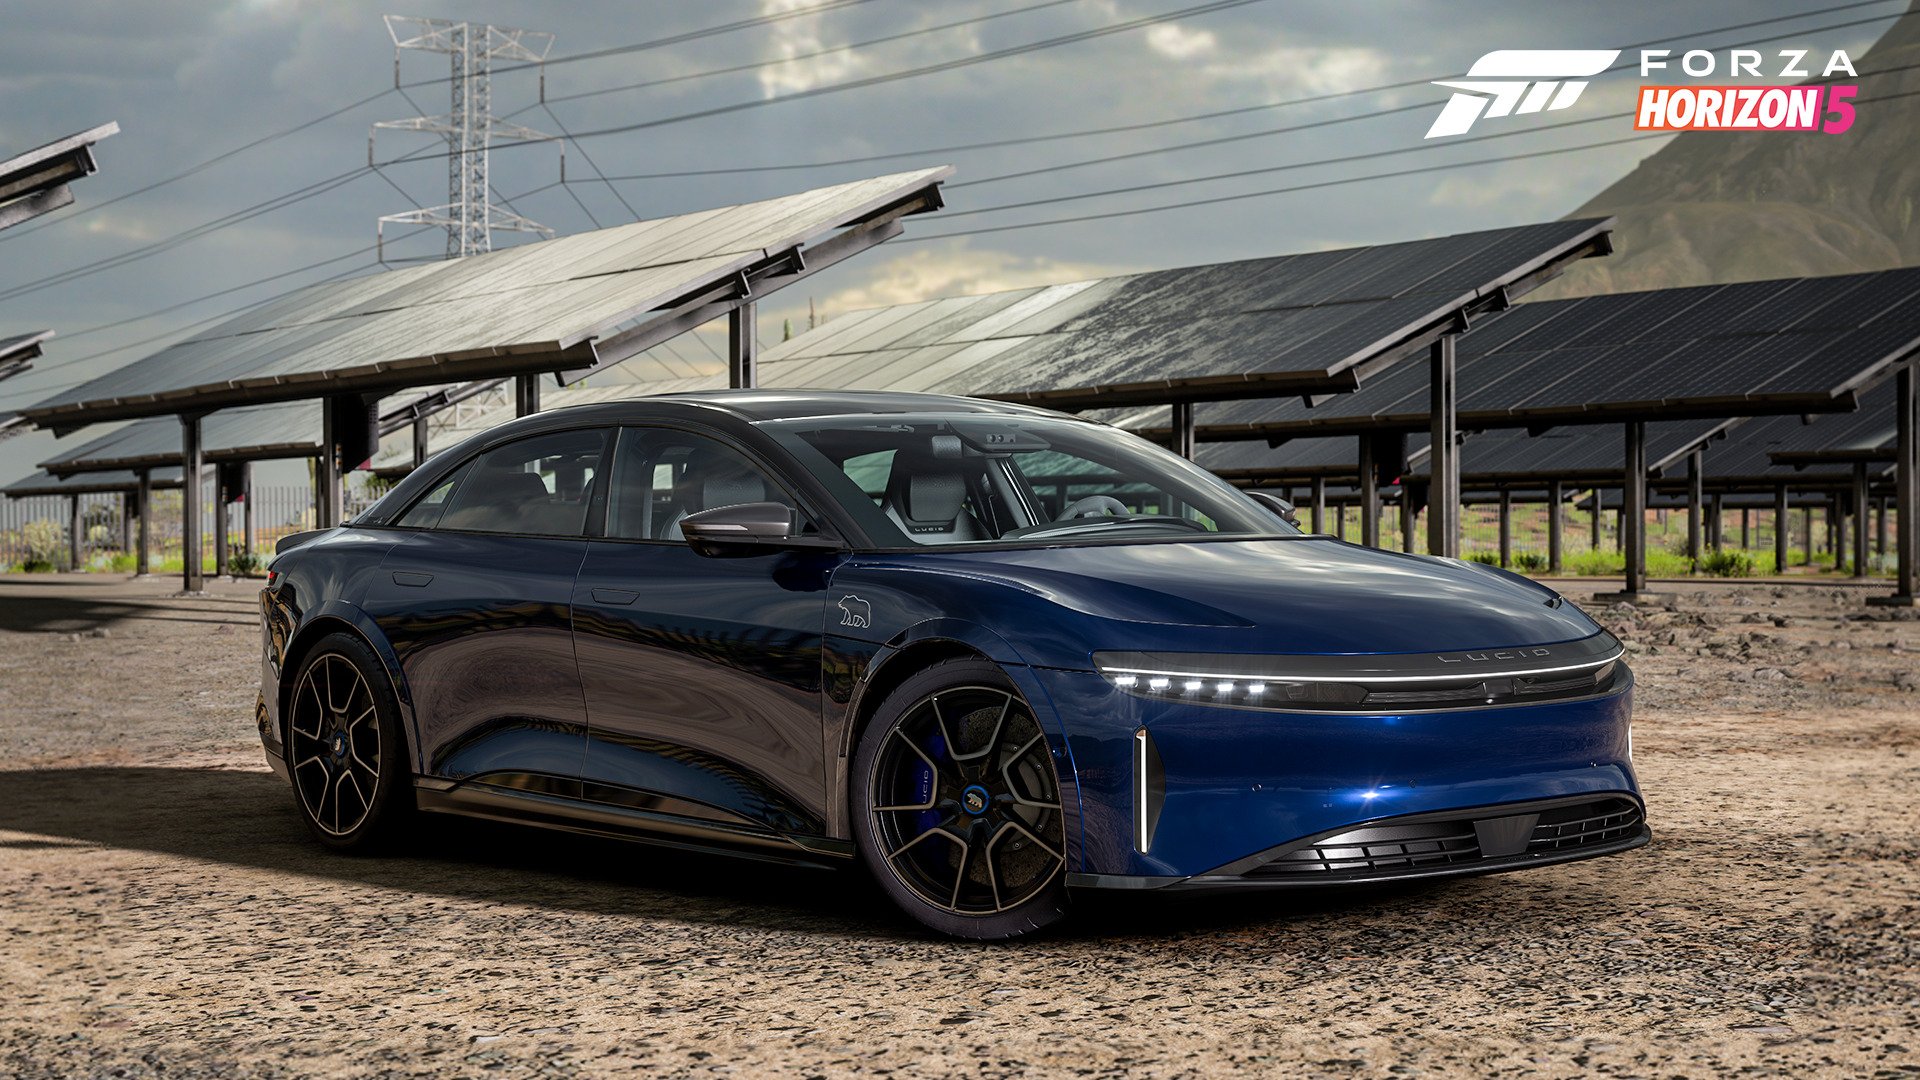 Forza Horizon 5 Series 27 Preview: Lucid Air Sapphire Stars in “American  Automotive” – GTPlanet, forza horizon 5 